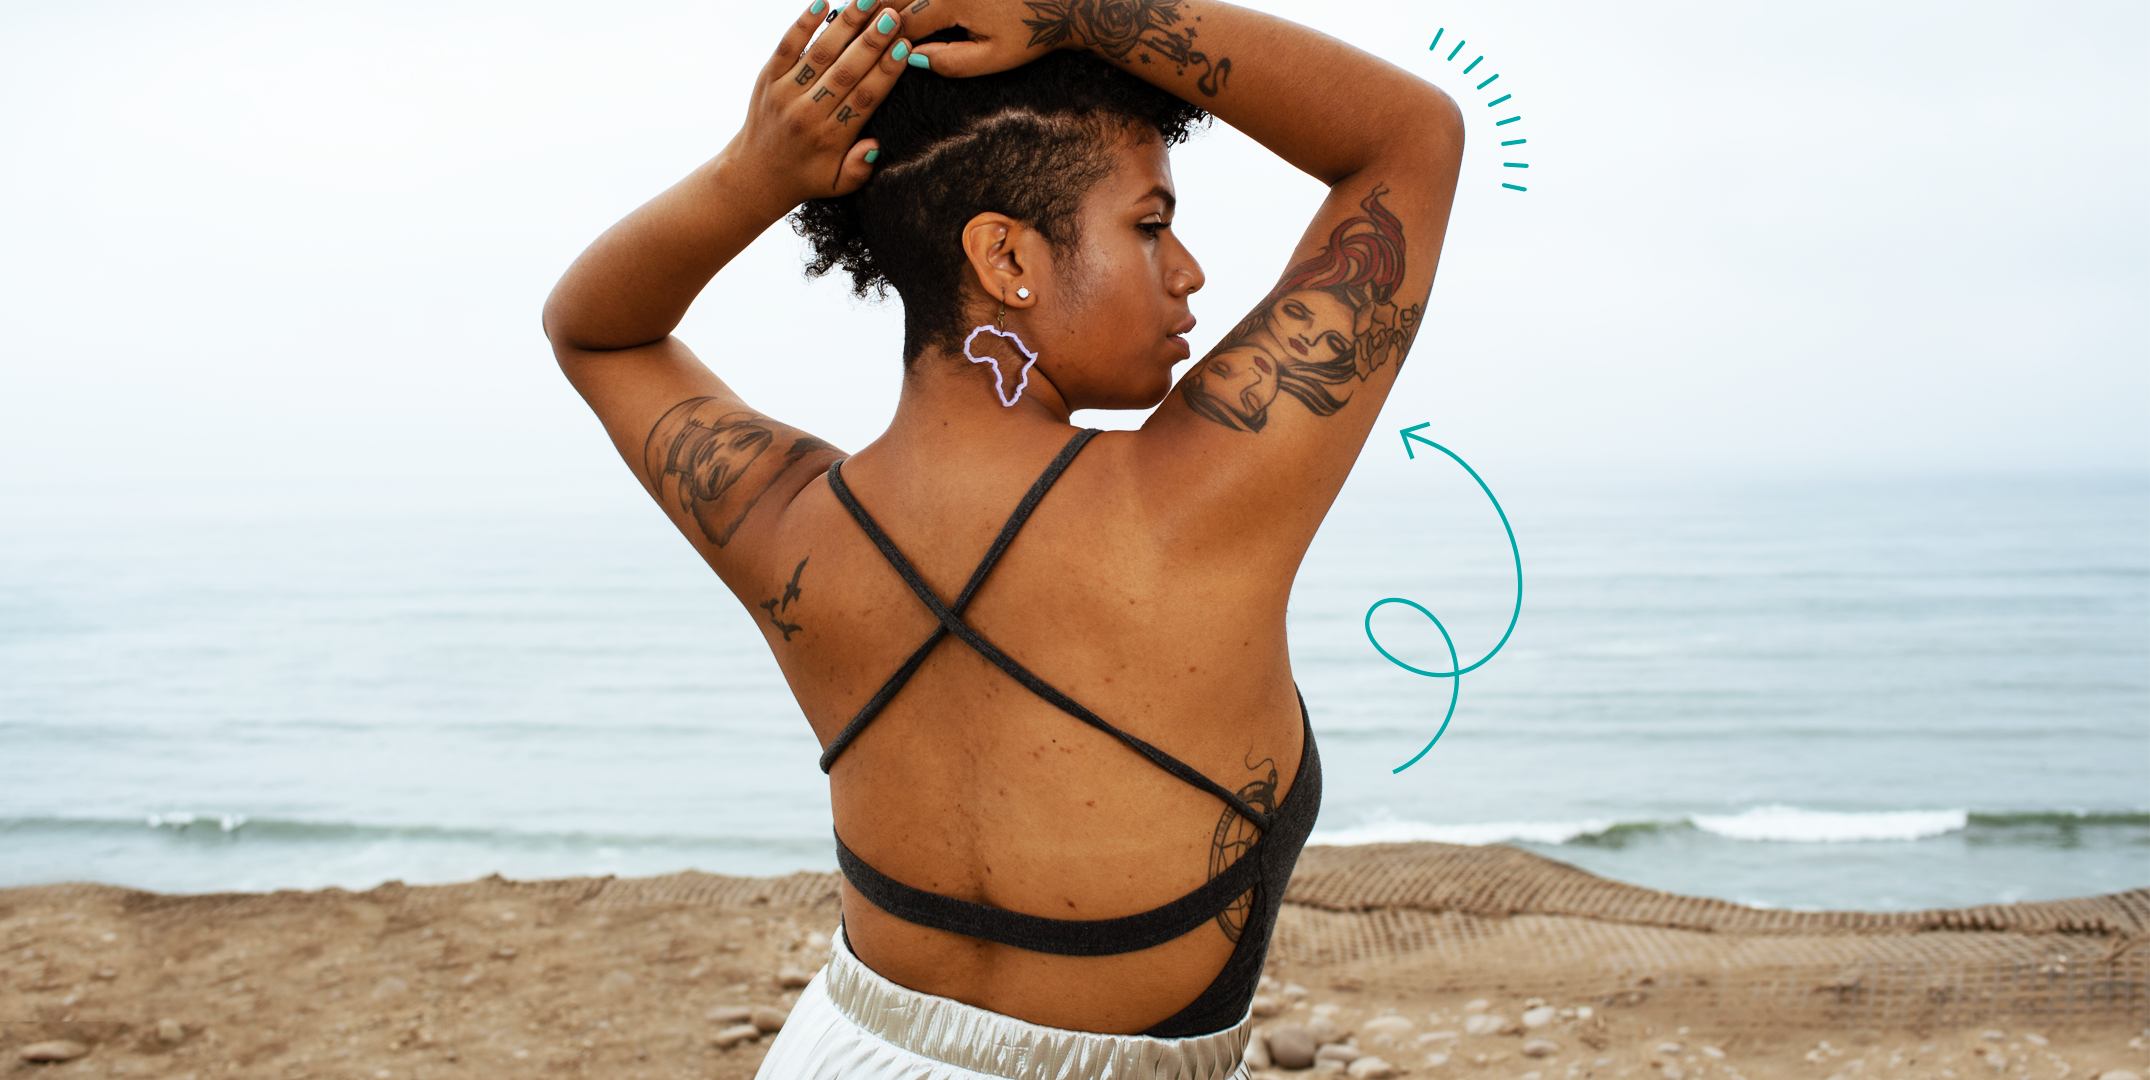 The Best Tattoo Colors For Your Skin Tone